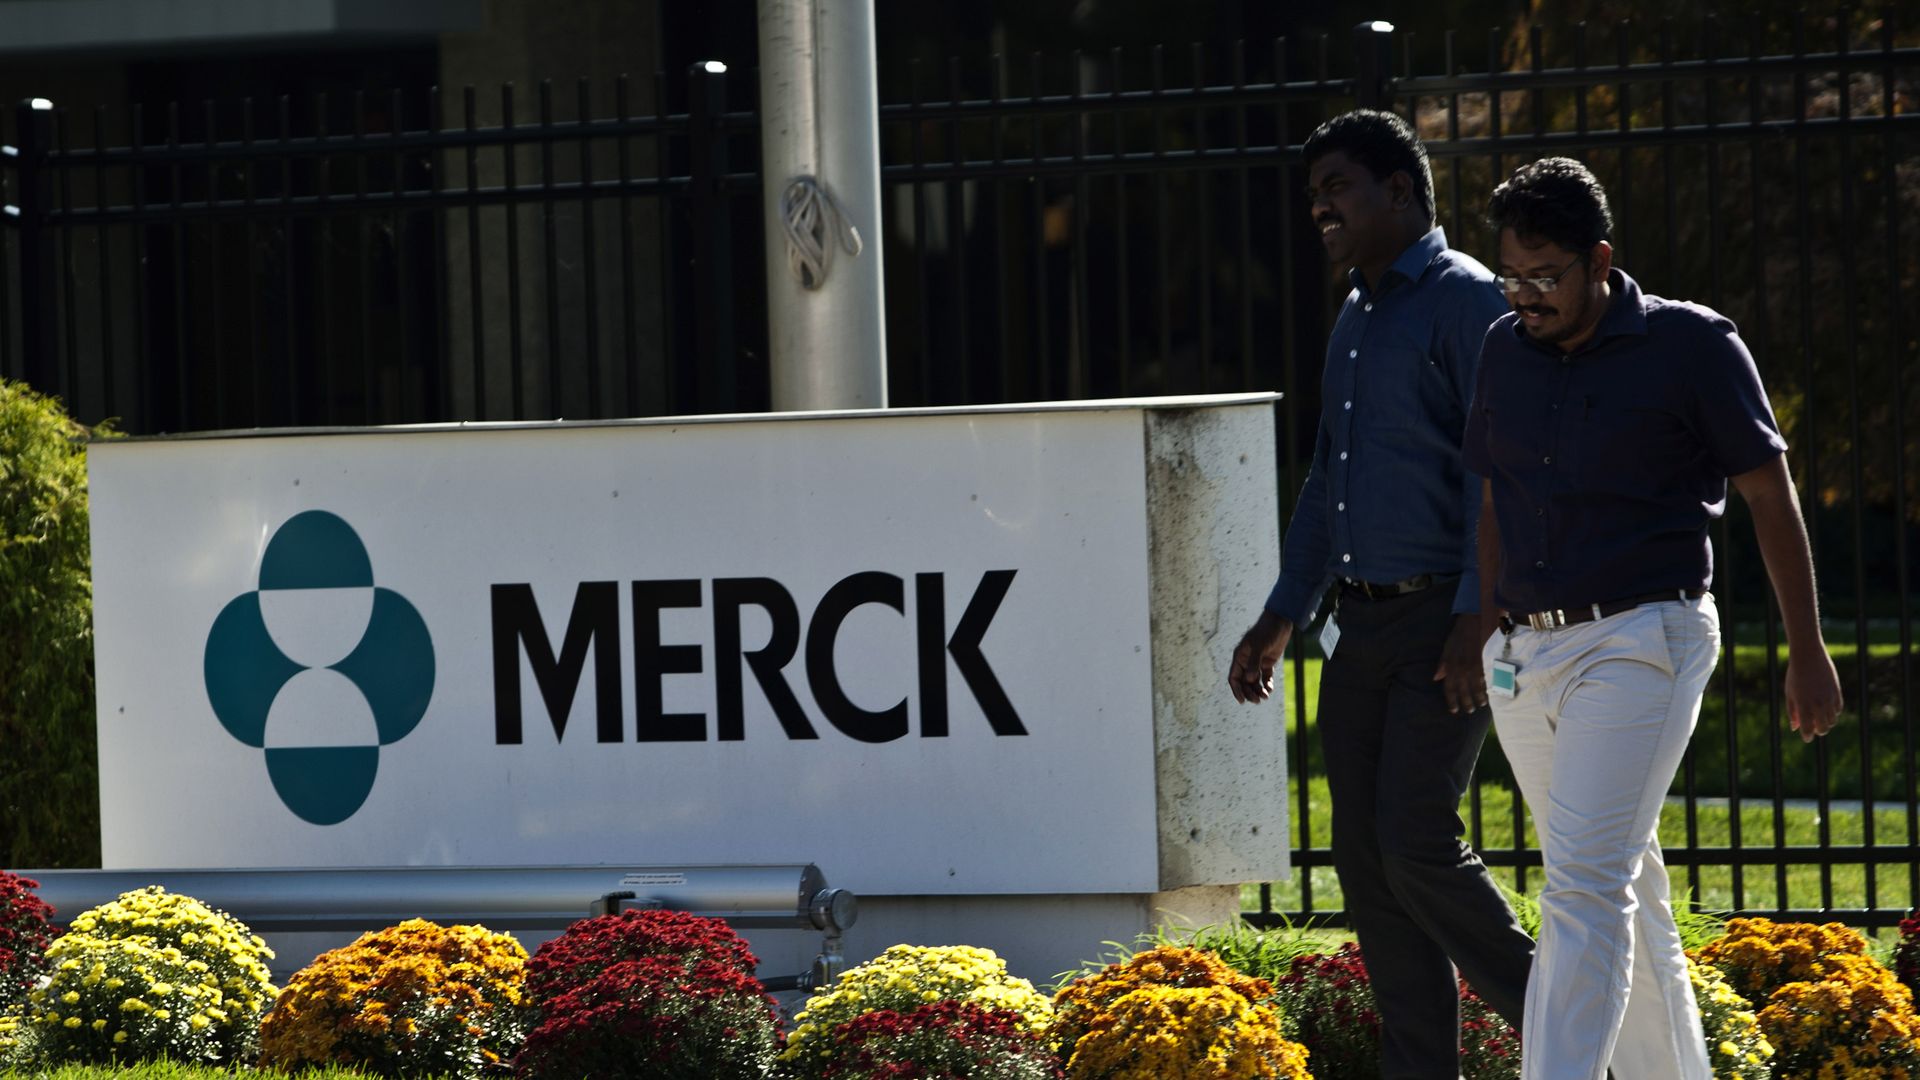 Two people walking outside of a building with a Merck sign.